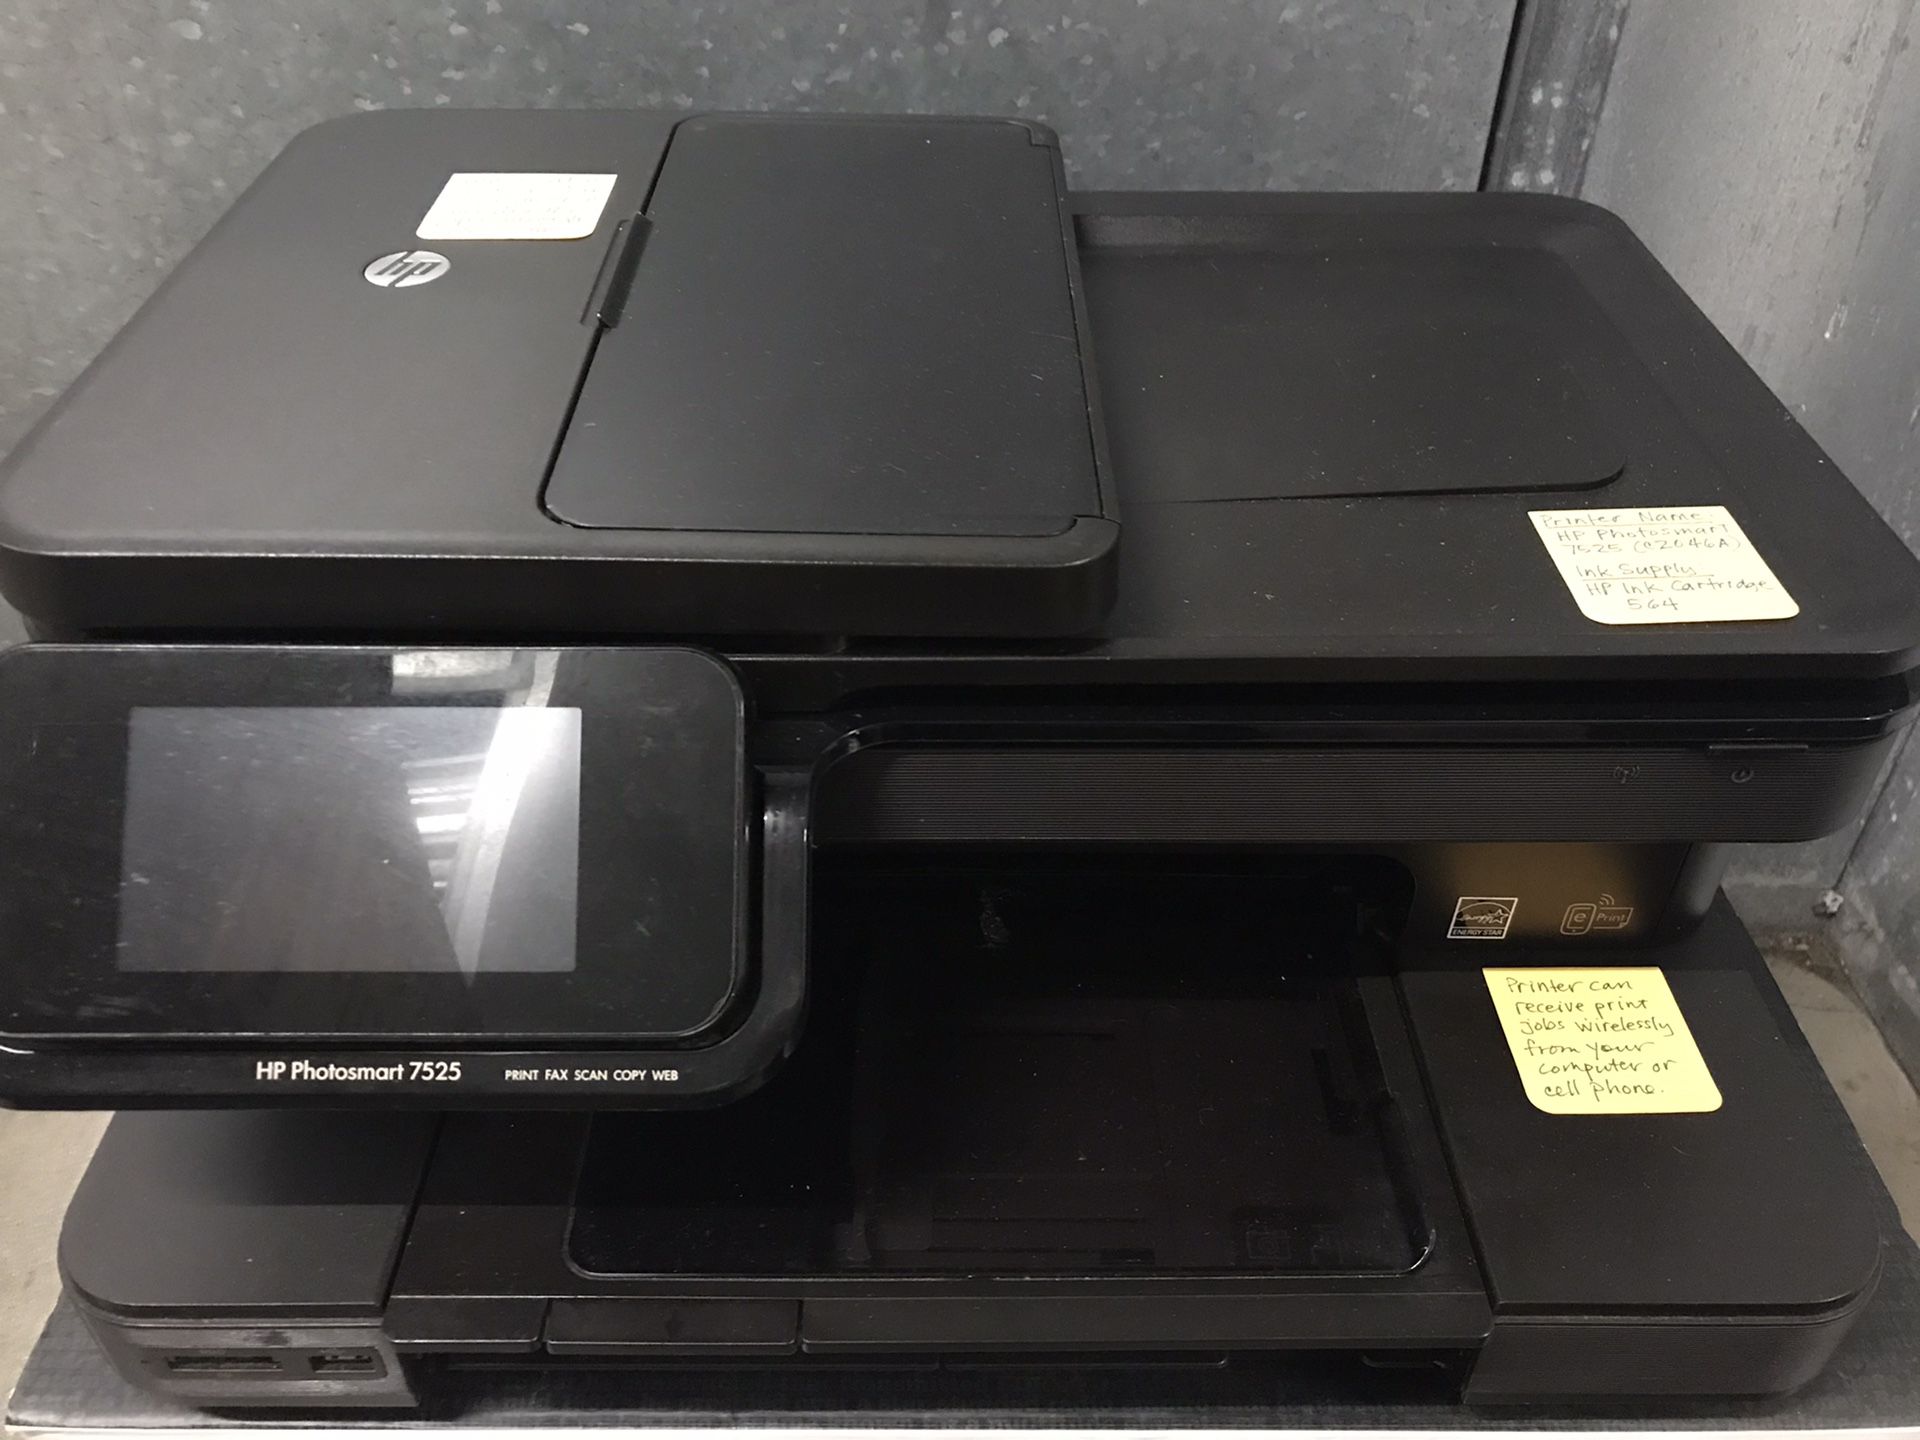 Wireless Printer HP Photosmart 7525 - Print Fax Scan Copy Web for in Los Angeles, CA - OfferUp